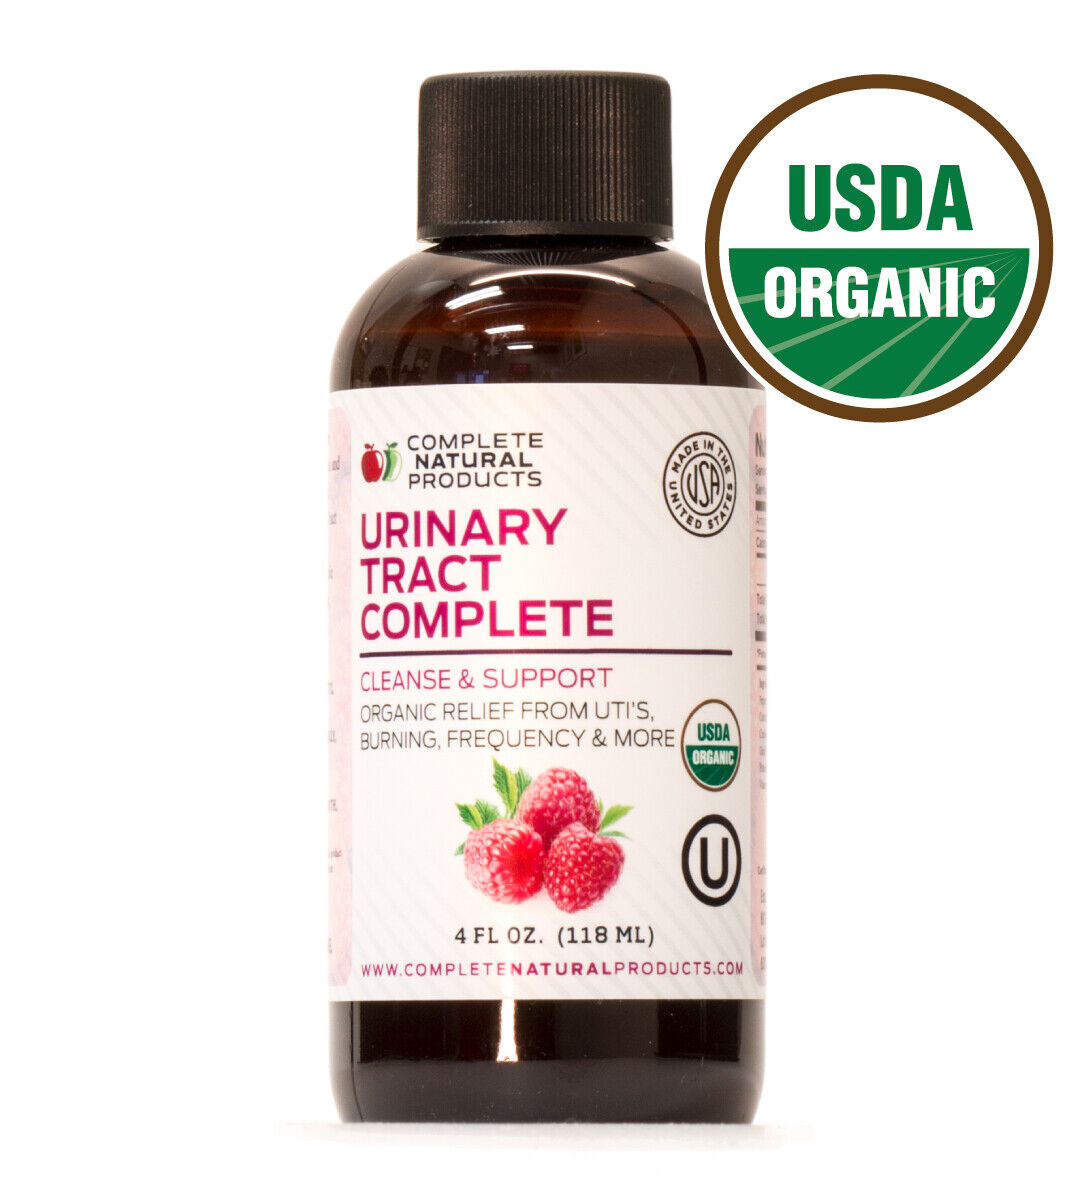 Urinary Tract Denver Mall Complete - Organic Re Seattle Mall UTI Bladder Liquid Infection